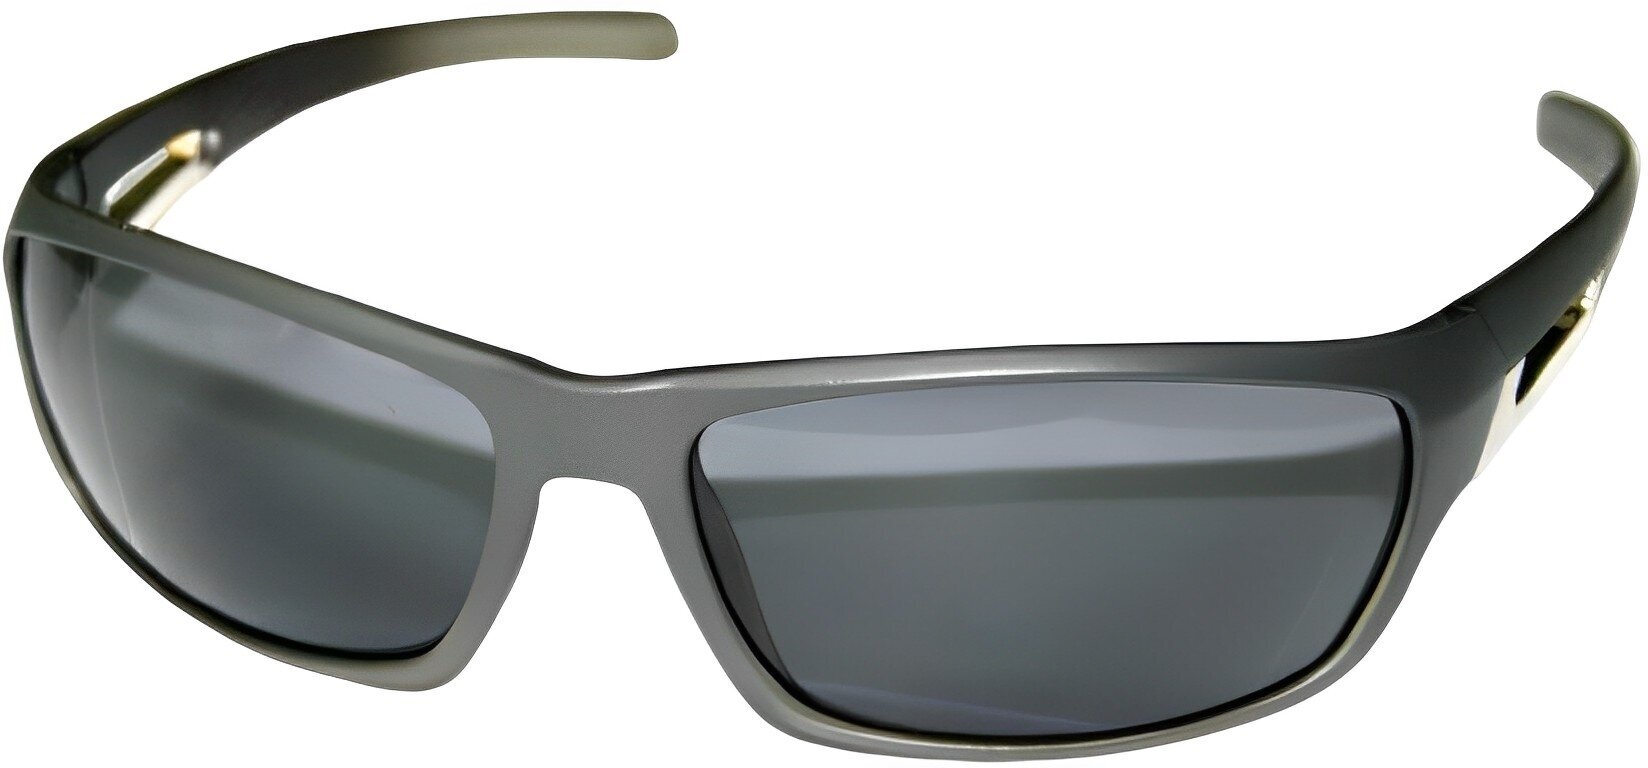 Yachting Glasses Lalizas TR90 Polarized Grey Yachting Glasses